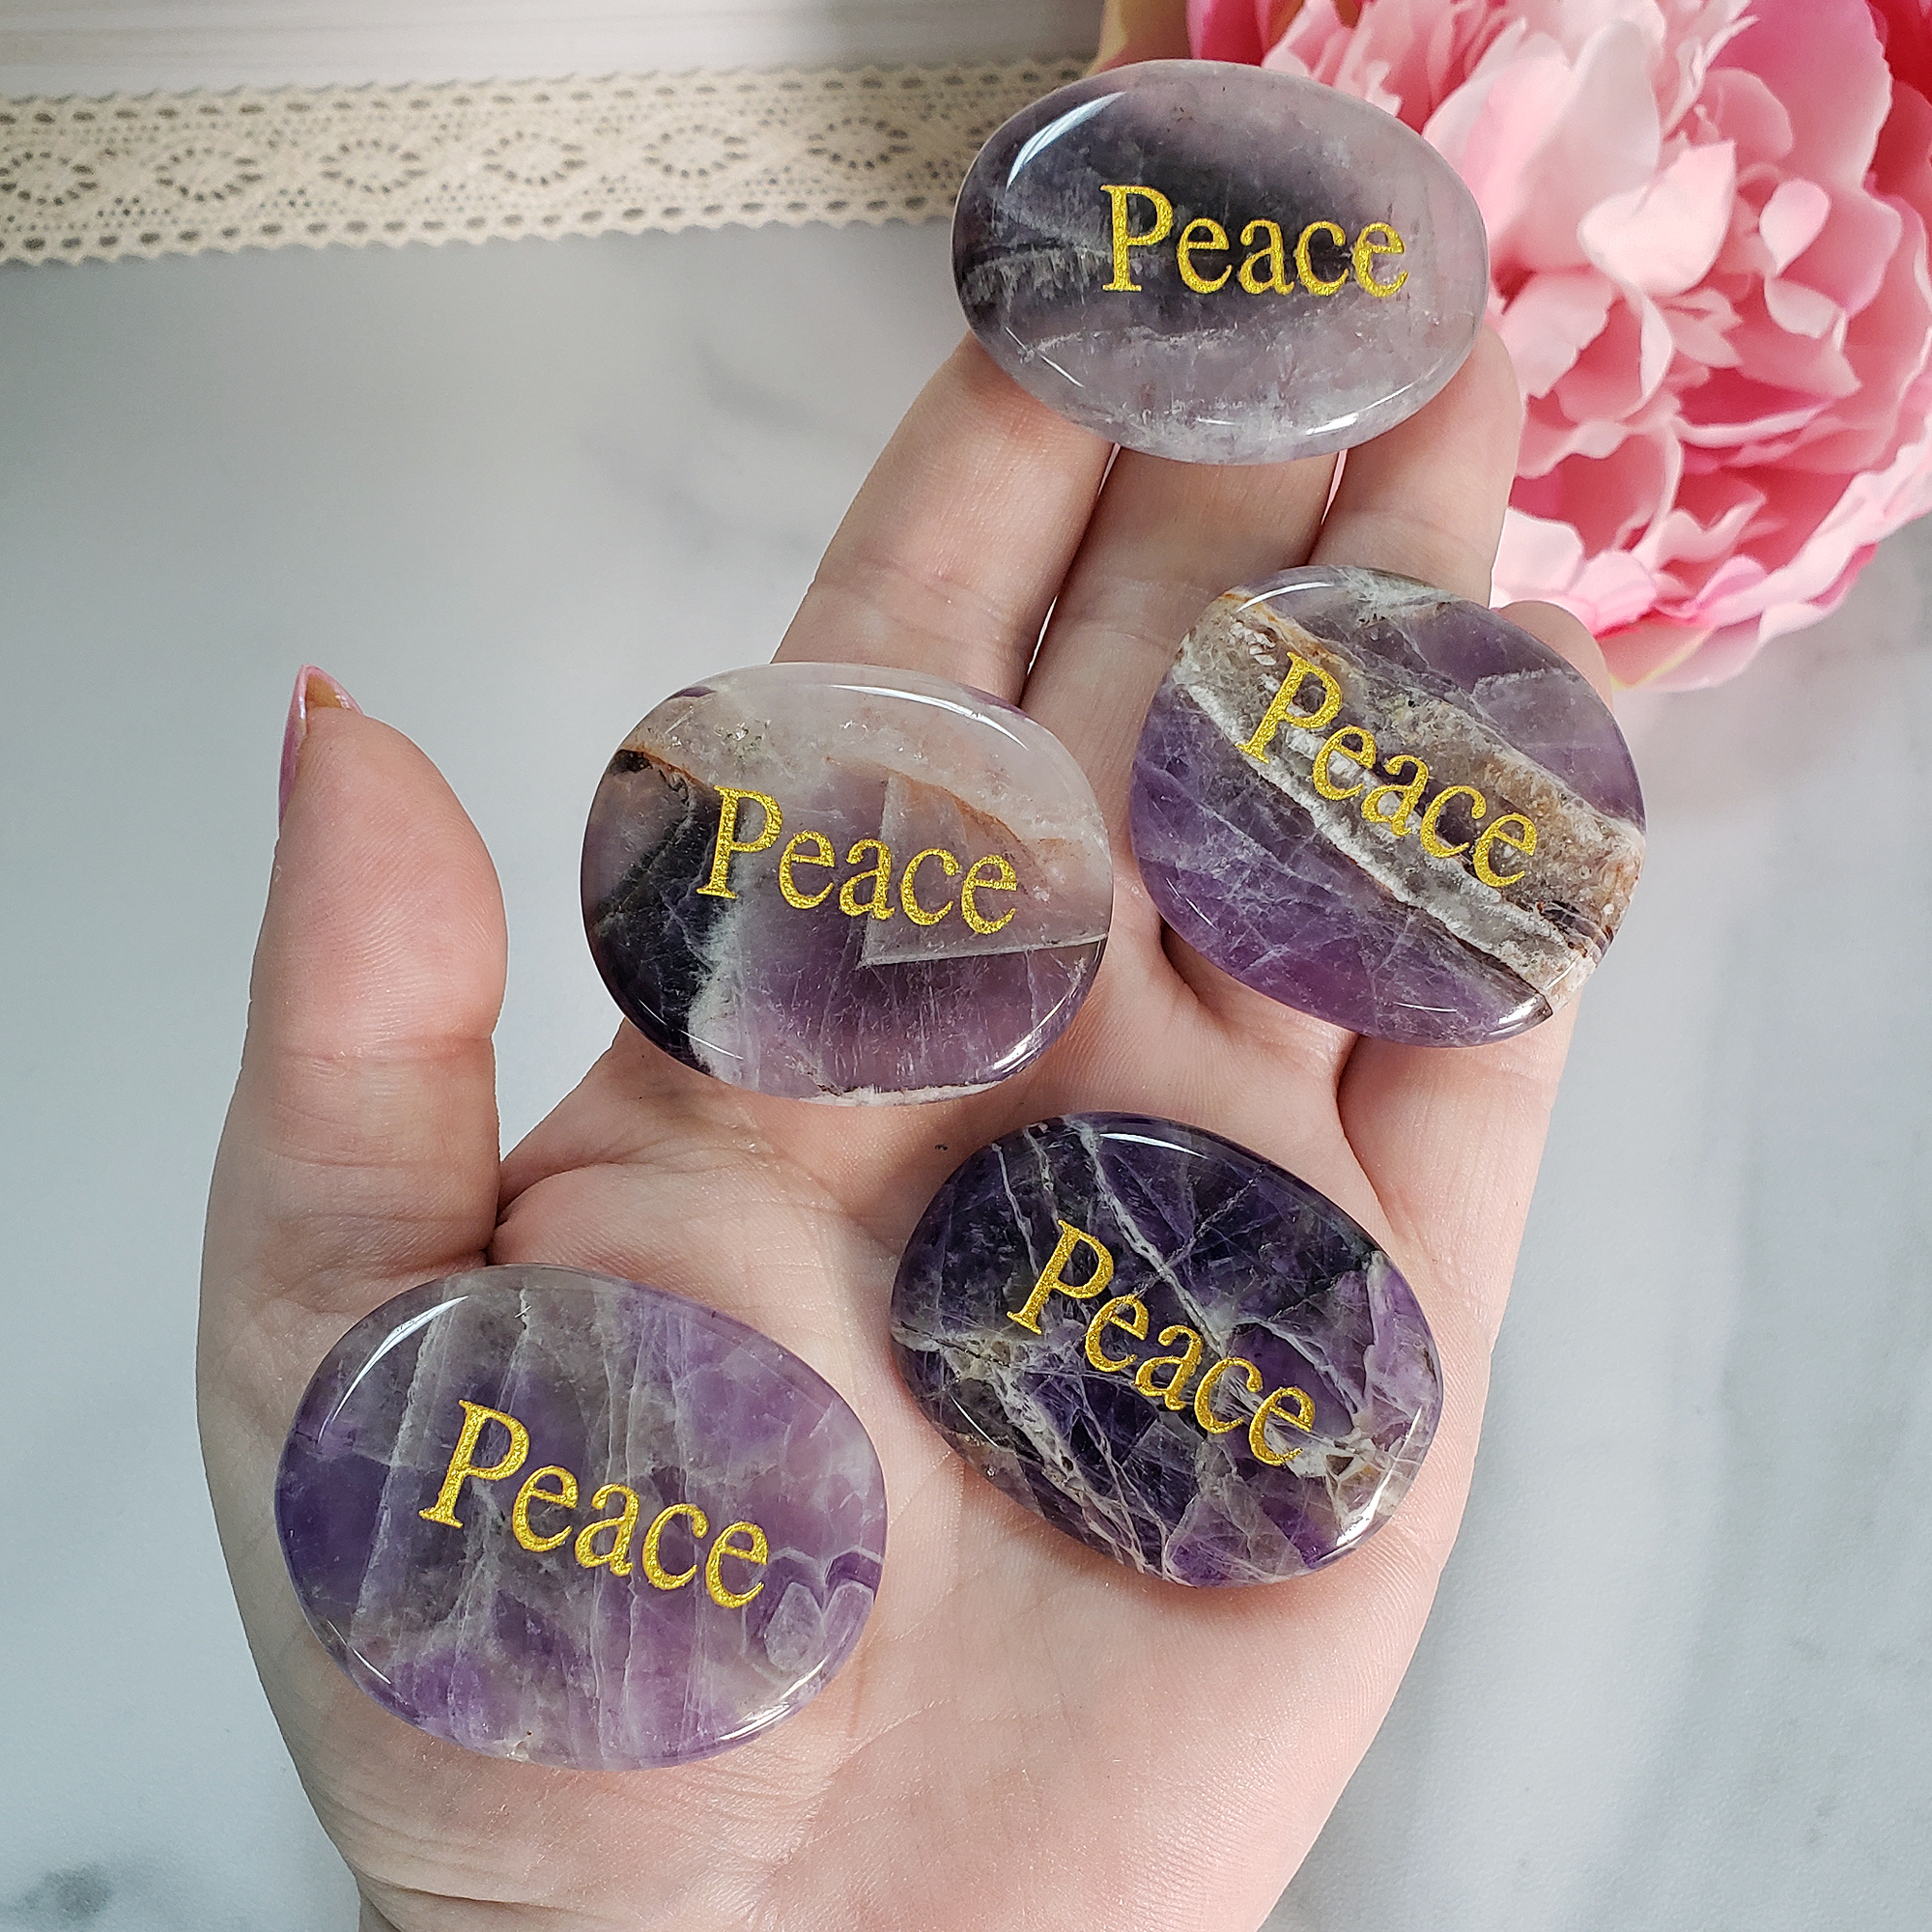 Amethyst Peace Affirmation Palm Stone | Natural Crystal Worry Stone with "Peace" Engraving - Amethyst crystal palm stones